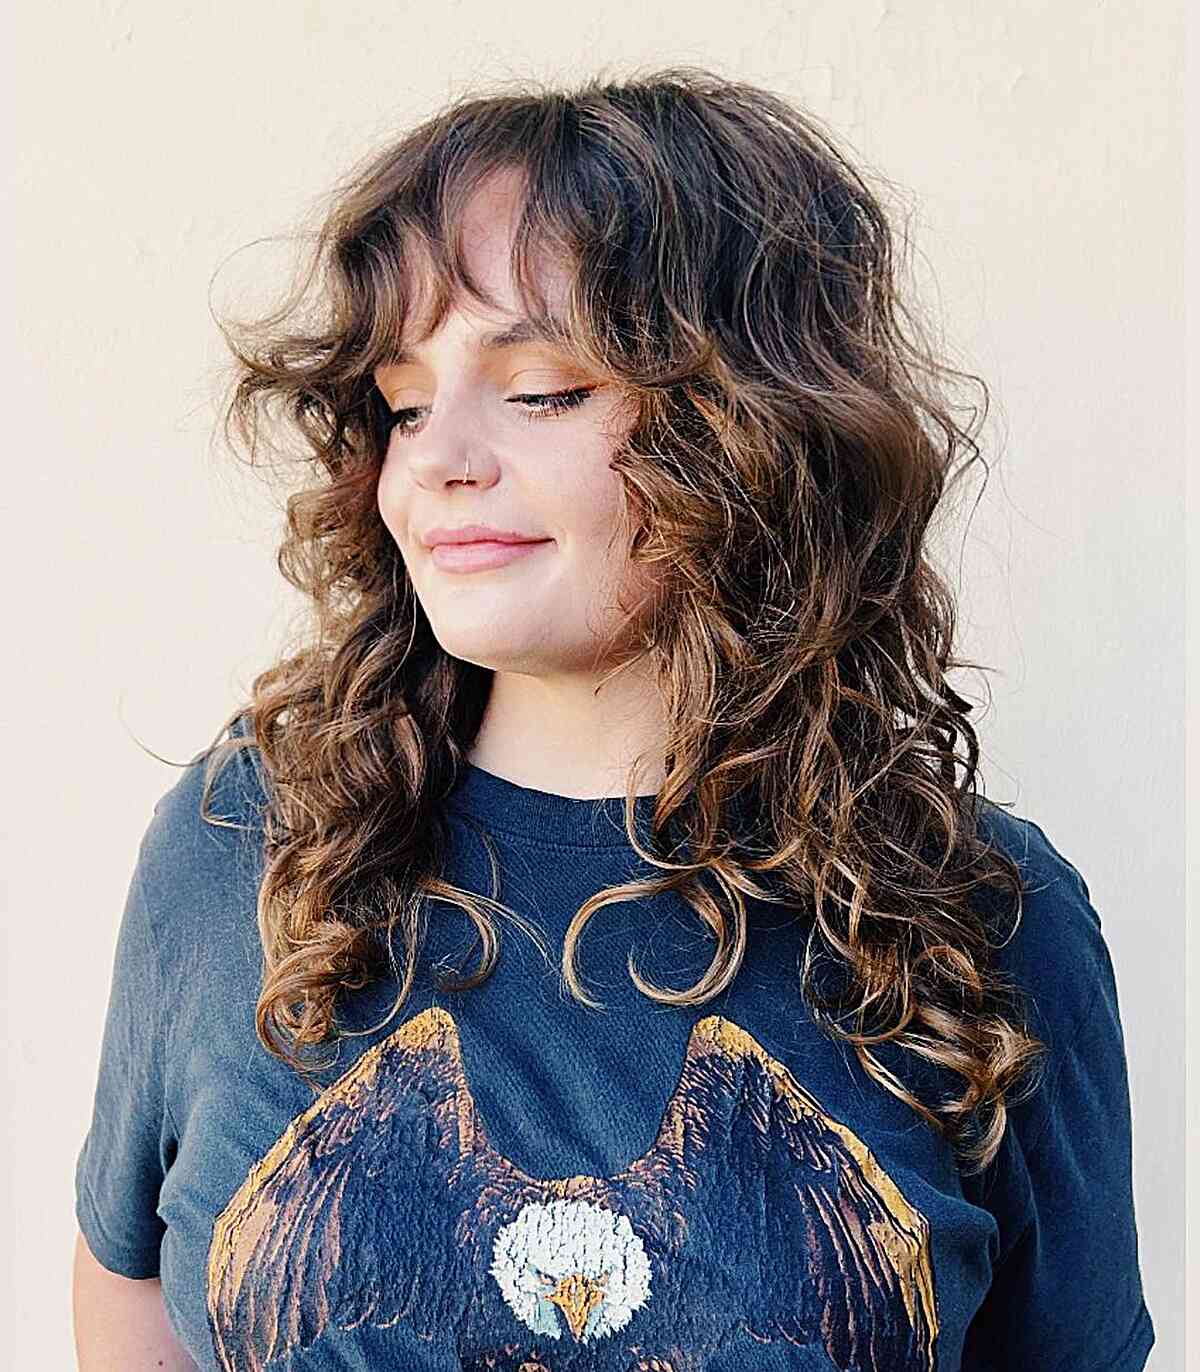 Lived-In Shaggy Curls with Natural Texture for girls with longer hair